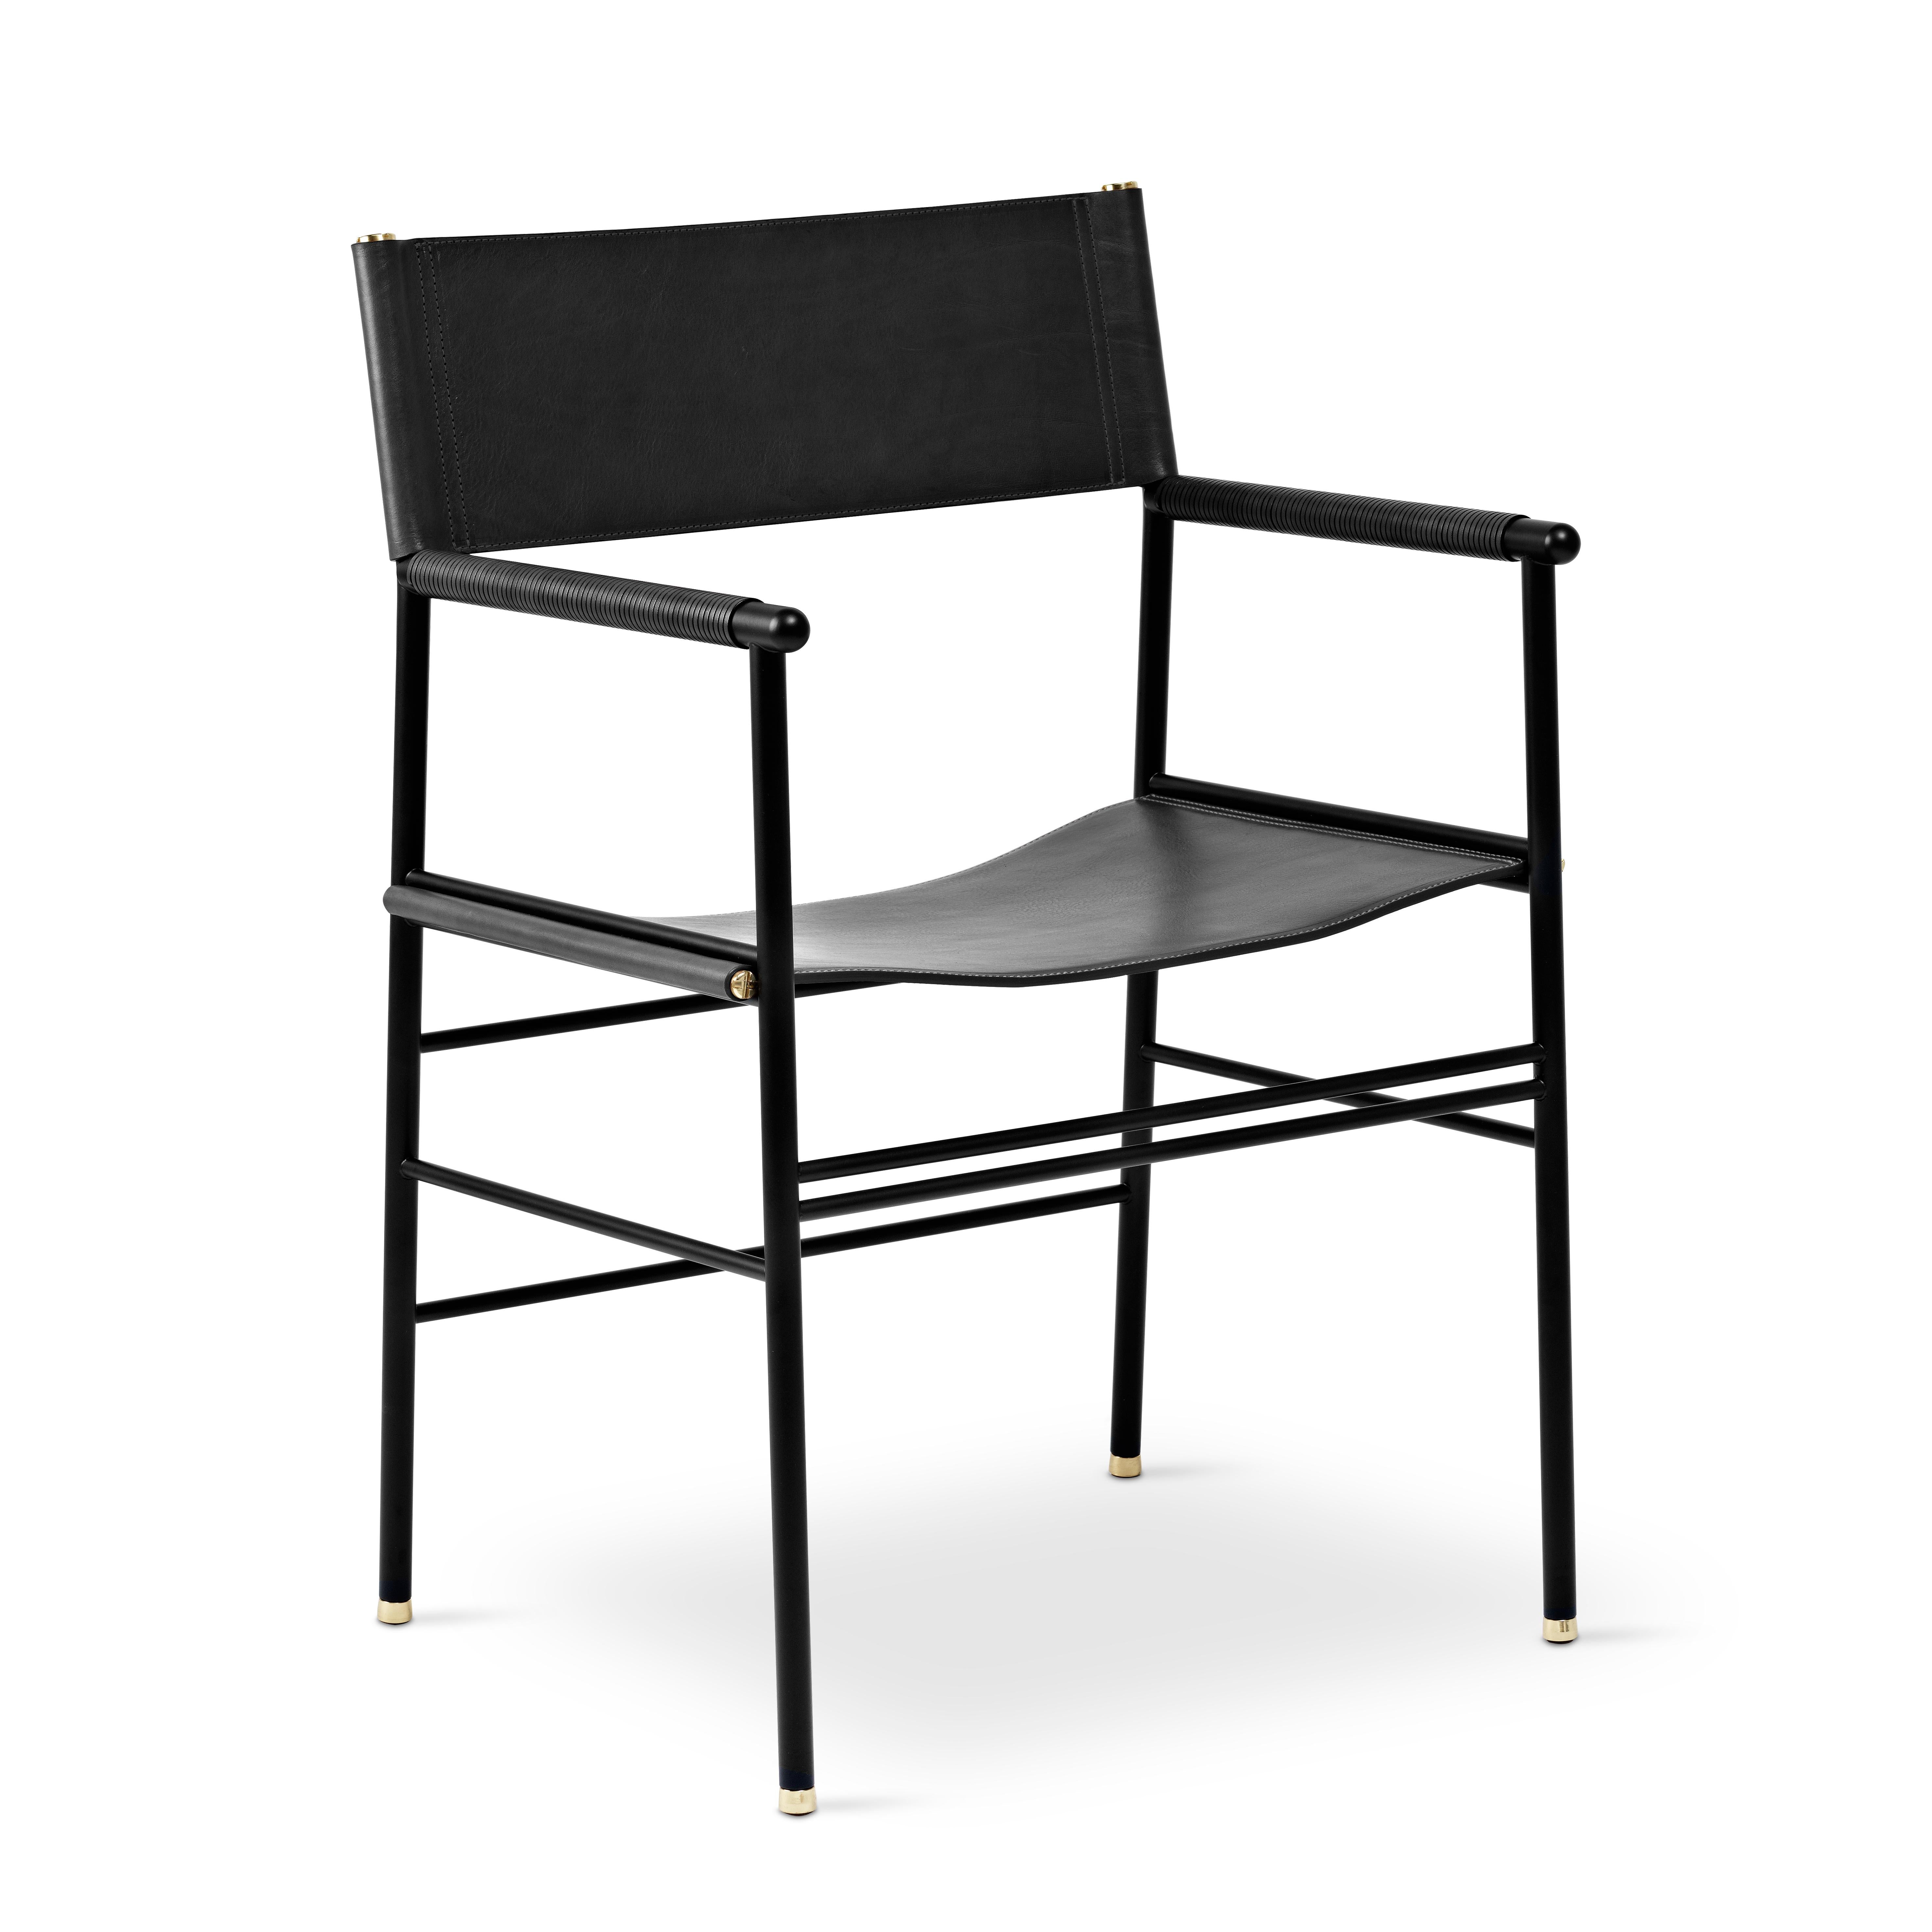 Spanish Pair Timeless Contemporary Armchair Black Leather & Black Rubber Metal For Sale